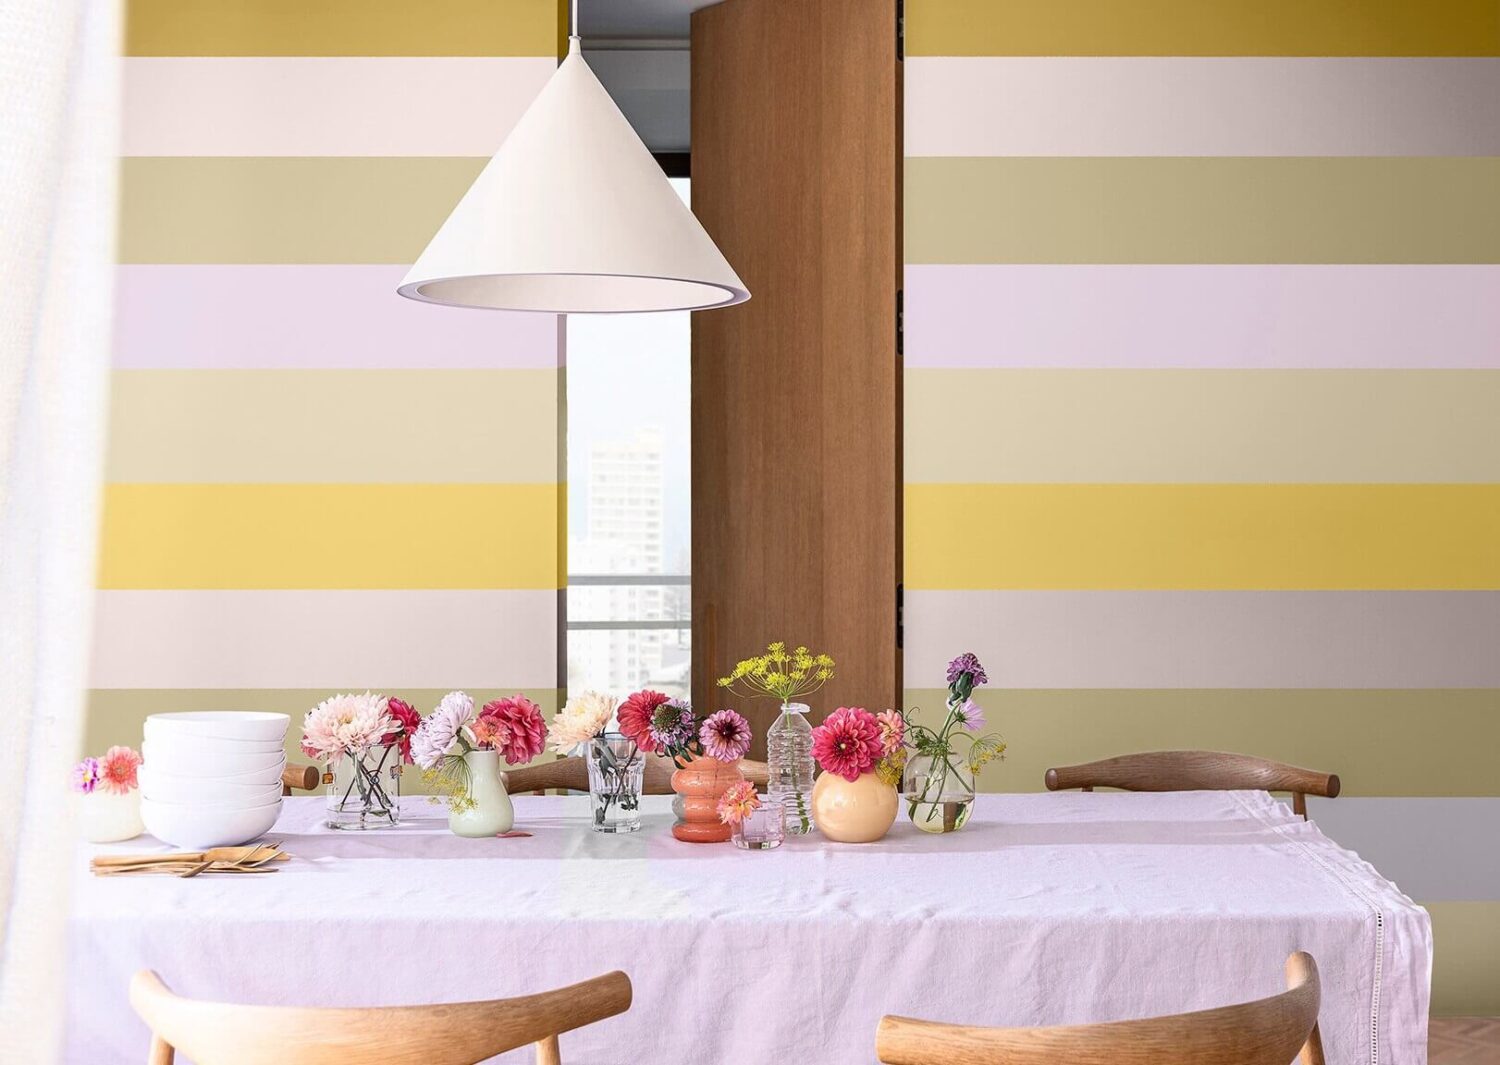 uplifting-colour-story-kitchen-inspiration-striped-feature-wall-nordroom